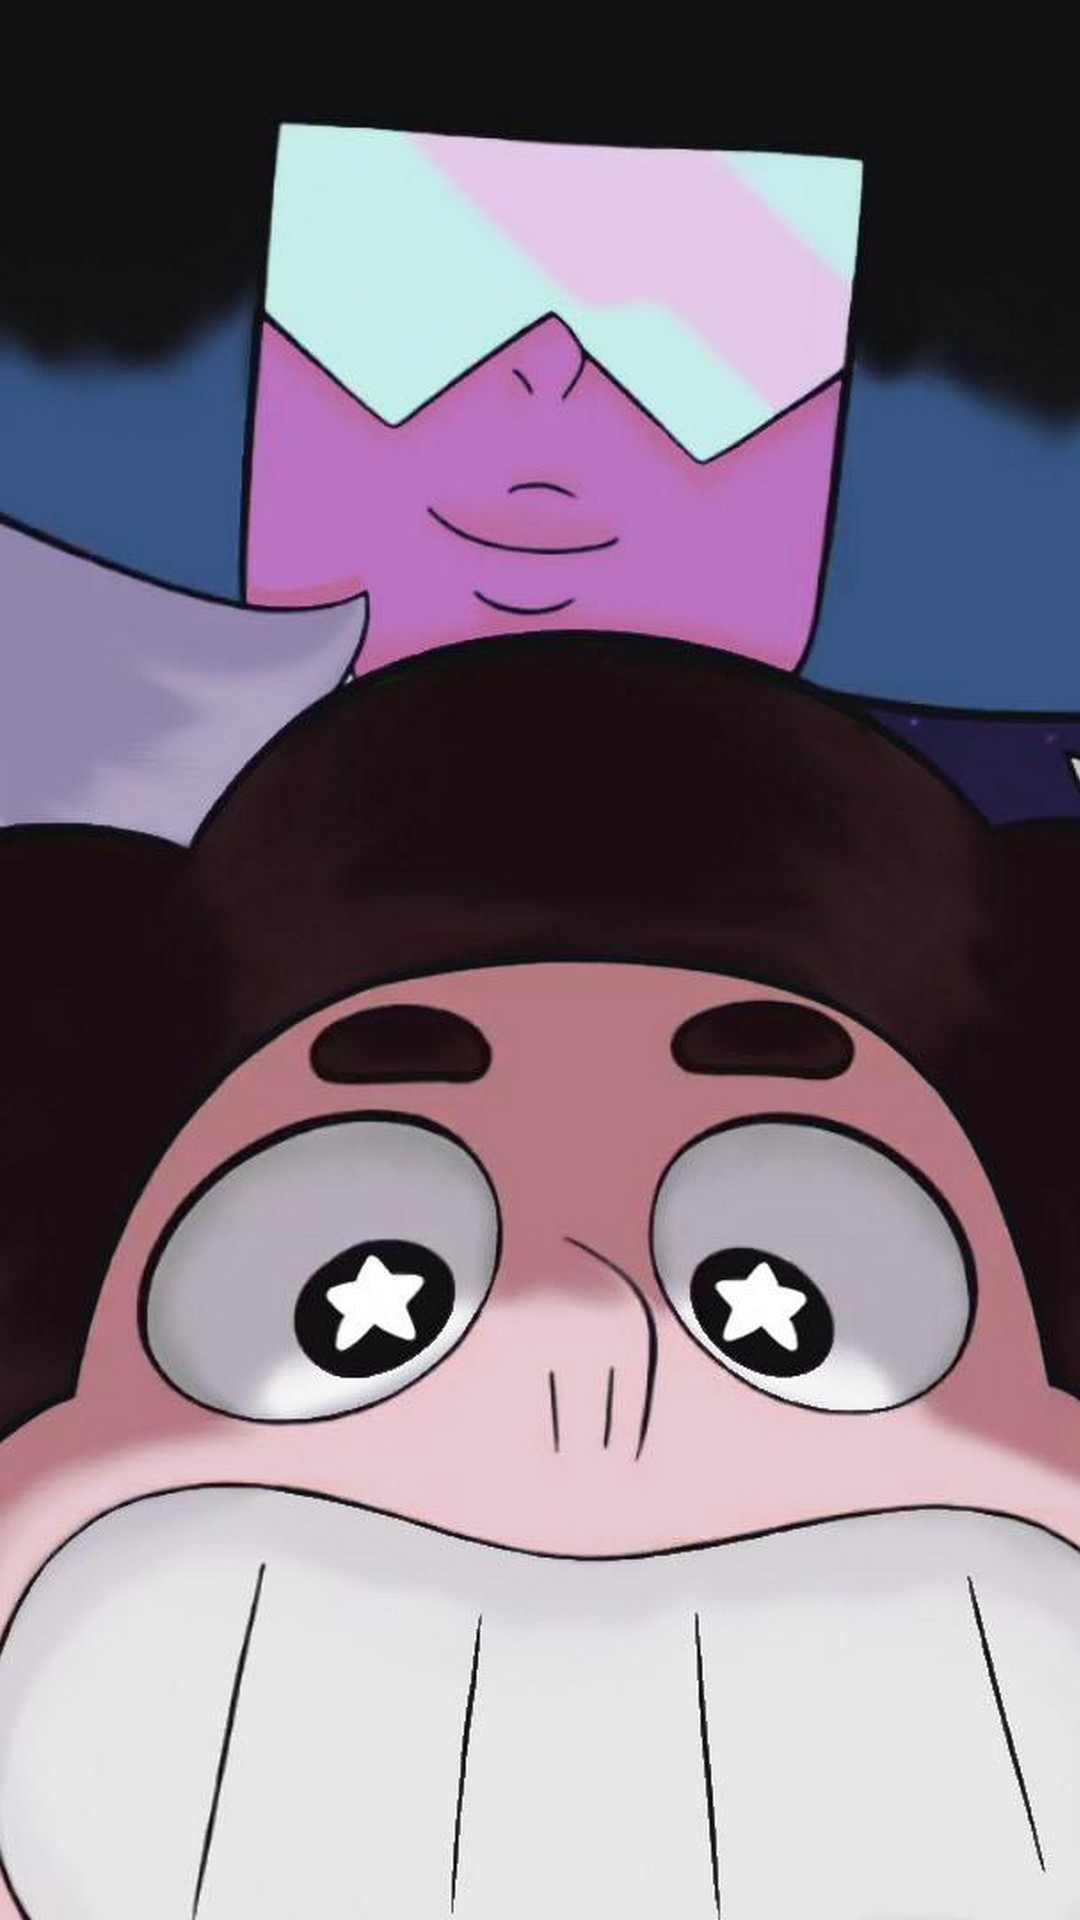 Steven Universe iPhone 6 Wallpaper HD with high-resolution 1080x1920 pixel. Download all Mobile Wallpapers and Use them as wallpapers for your iPhone, Tablet, iPad, Android and other mobile devices